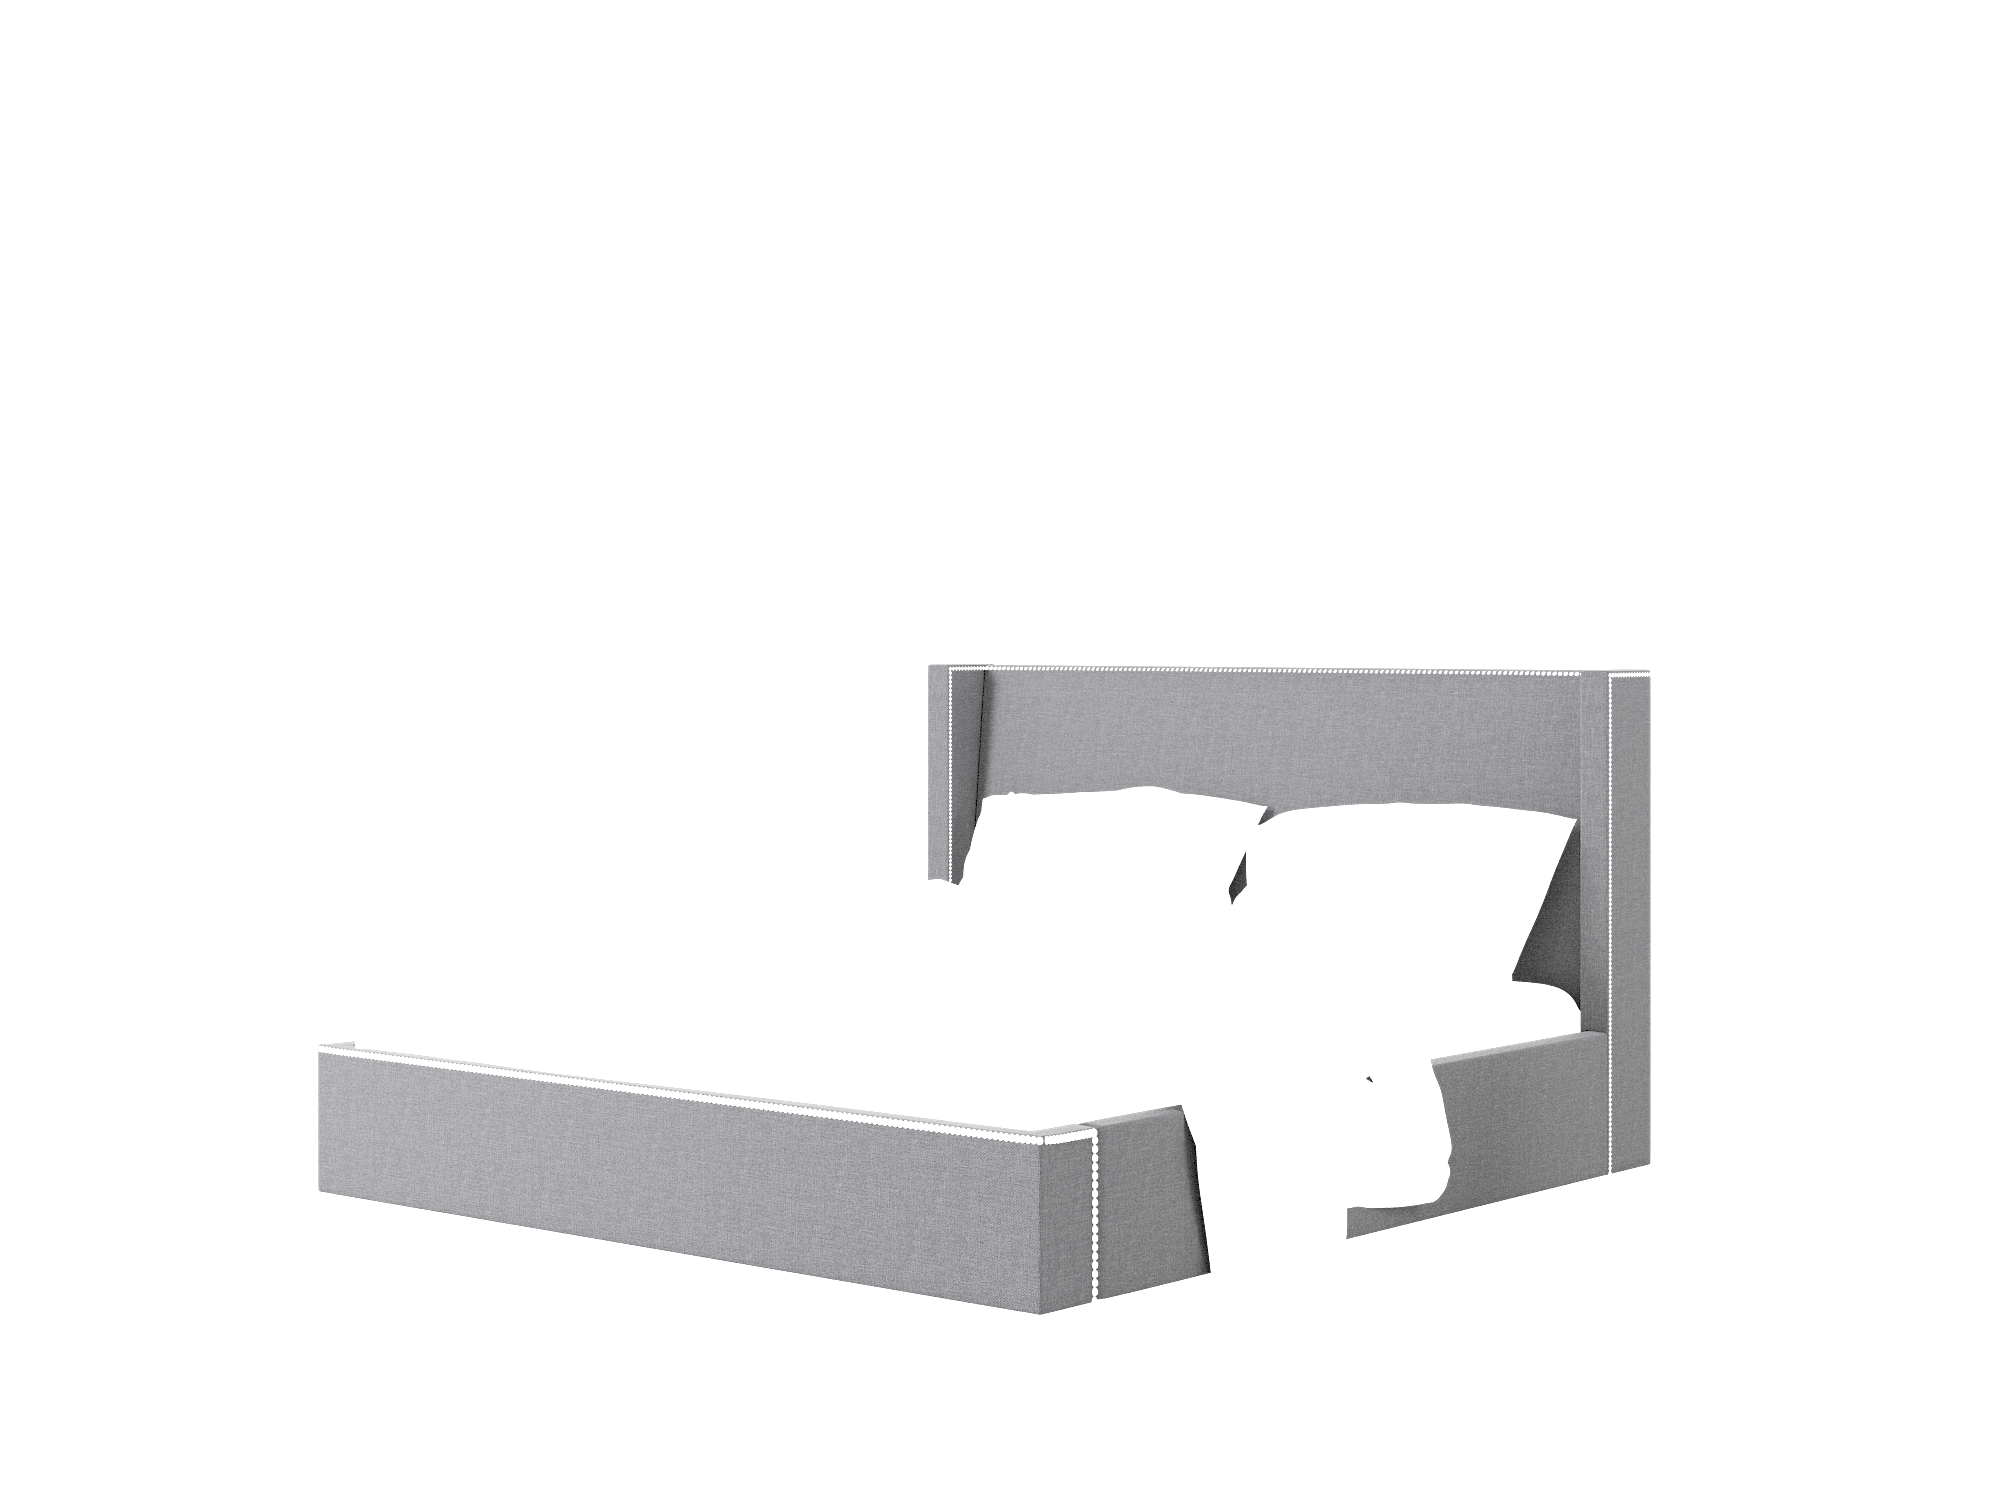 Bria Notion Graphite Bed King Room Texture